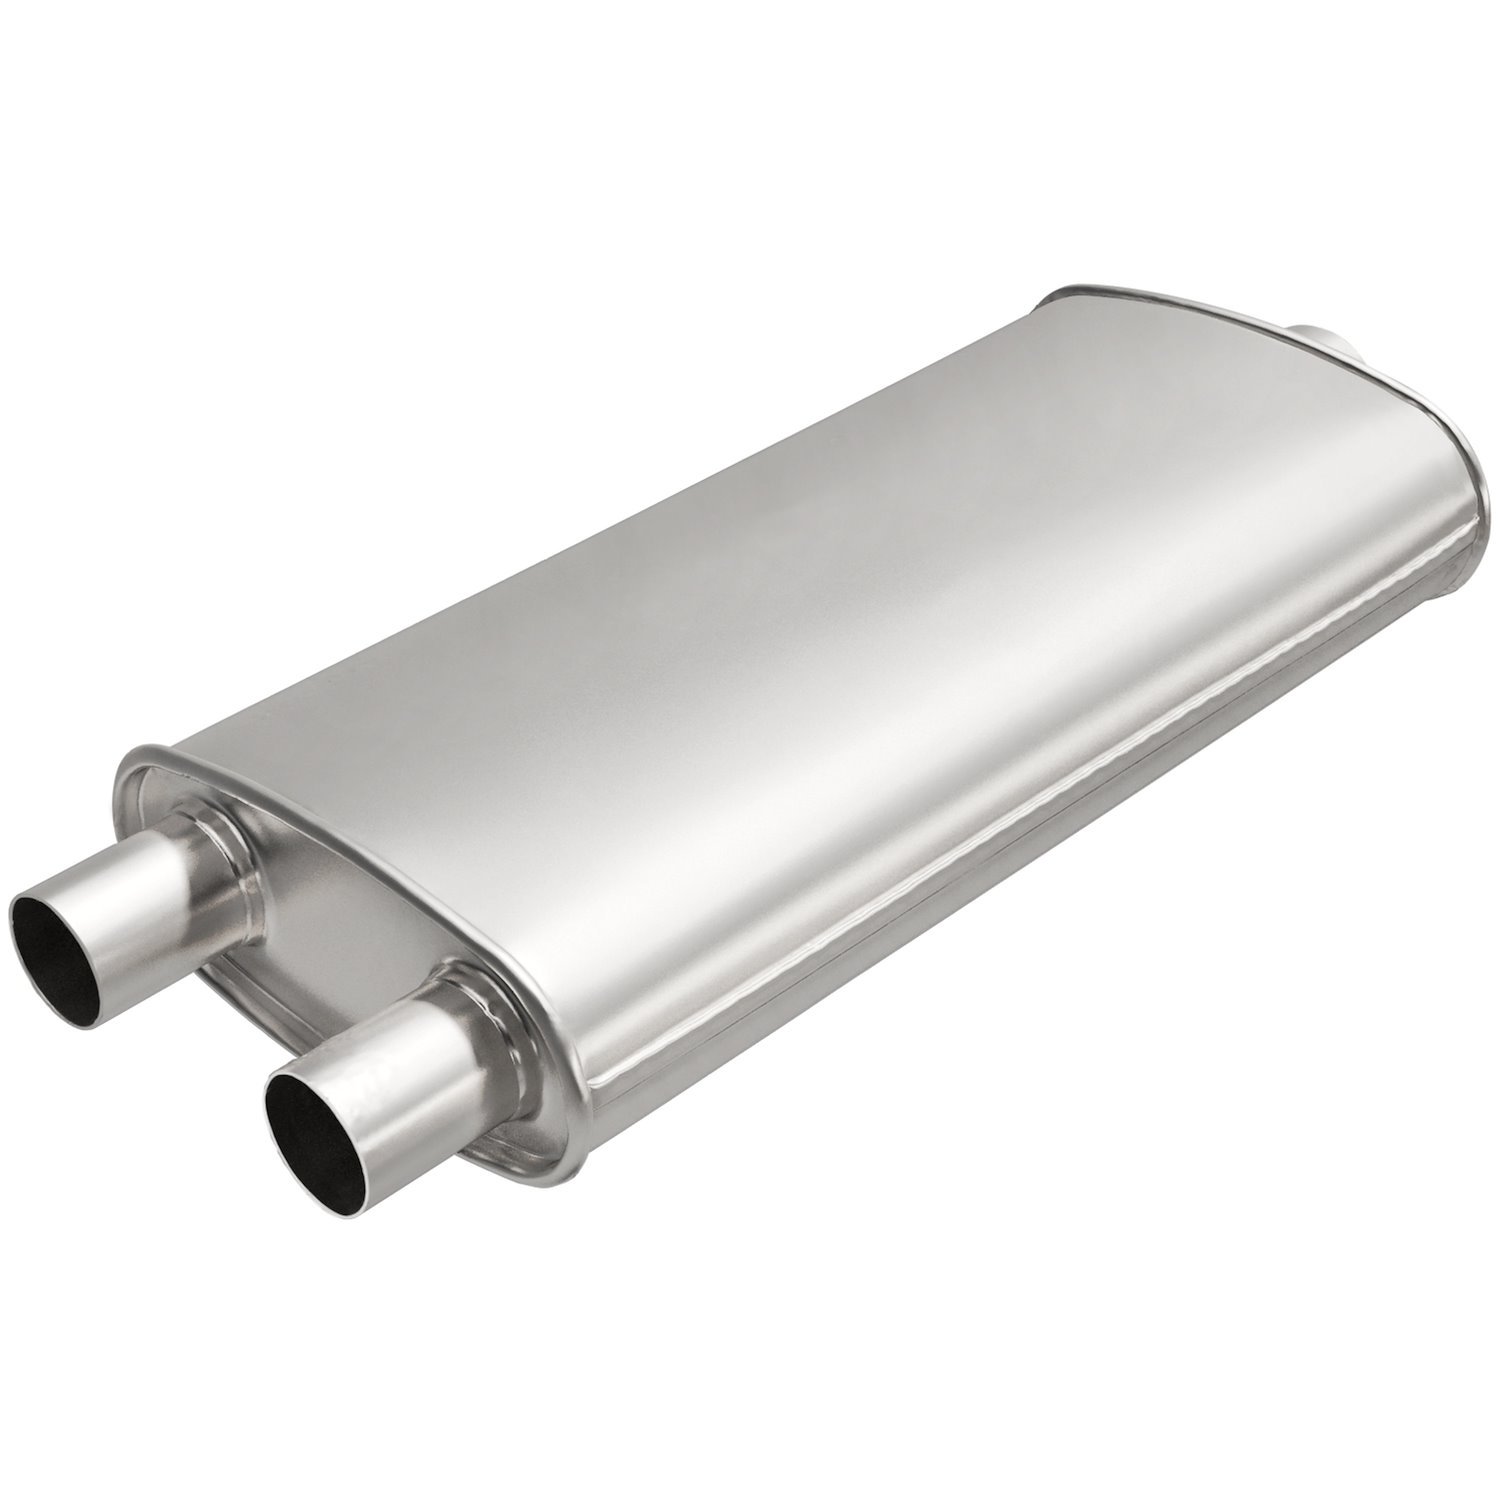 Universal Exhaust Muffler, Oval, Inlet/Outlet: 3 in./2.25 in. , Center/Dual